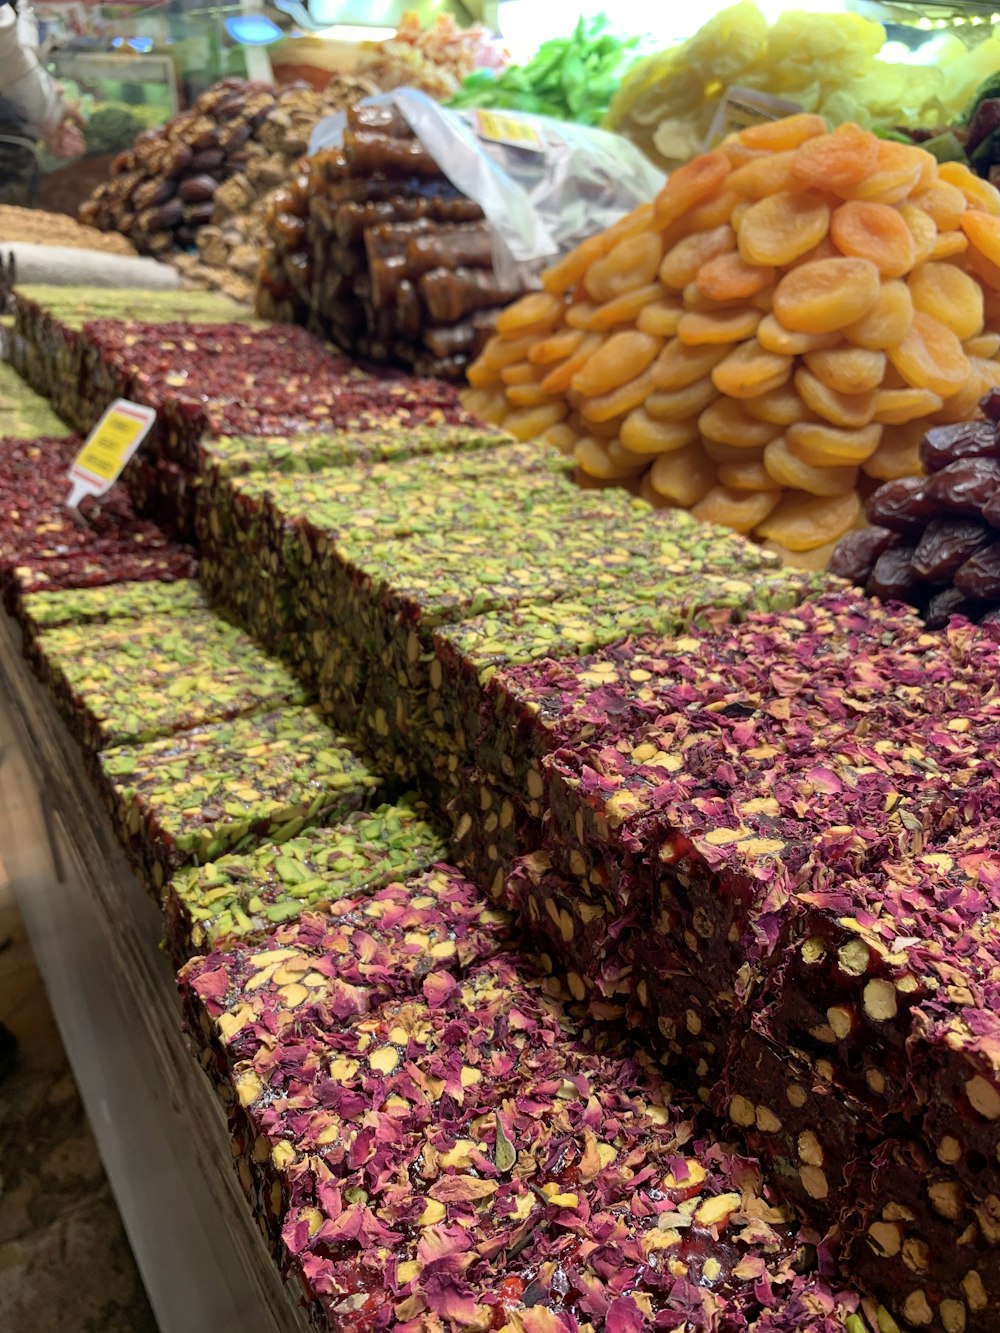 a variety of dried fruits and vegetables on display